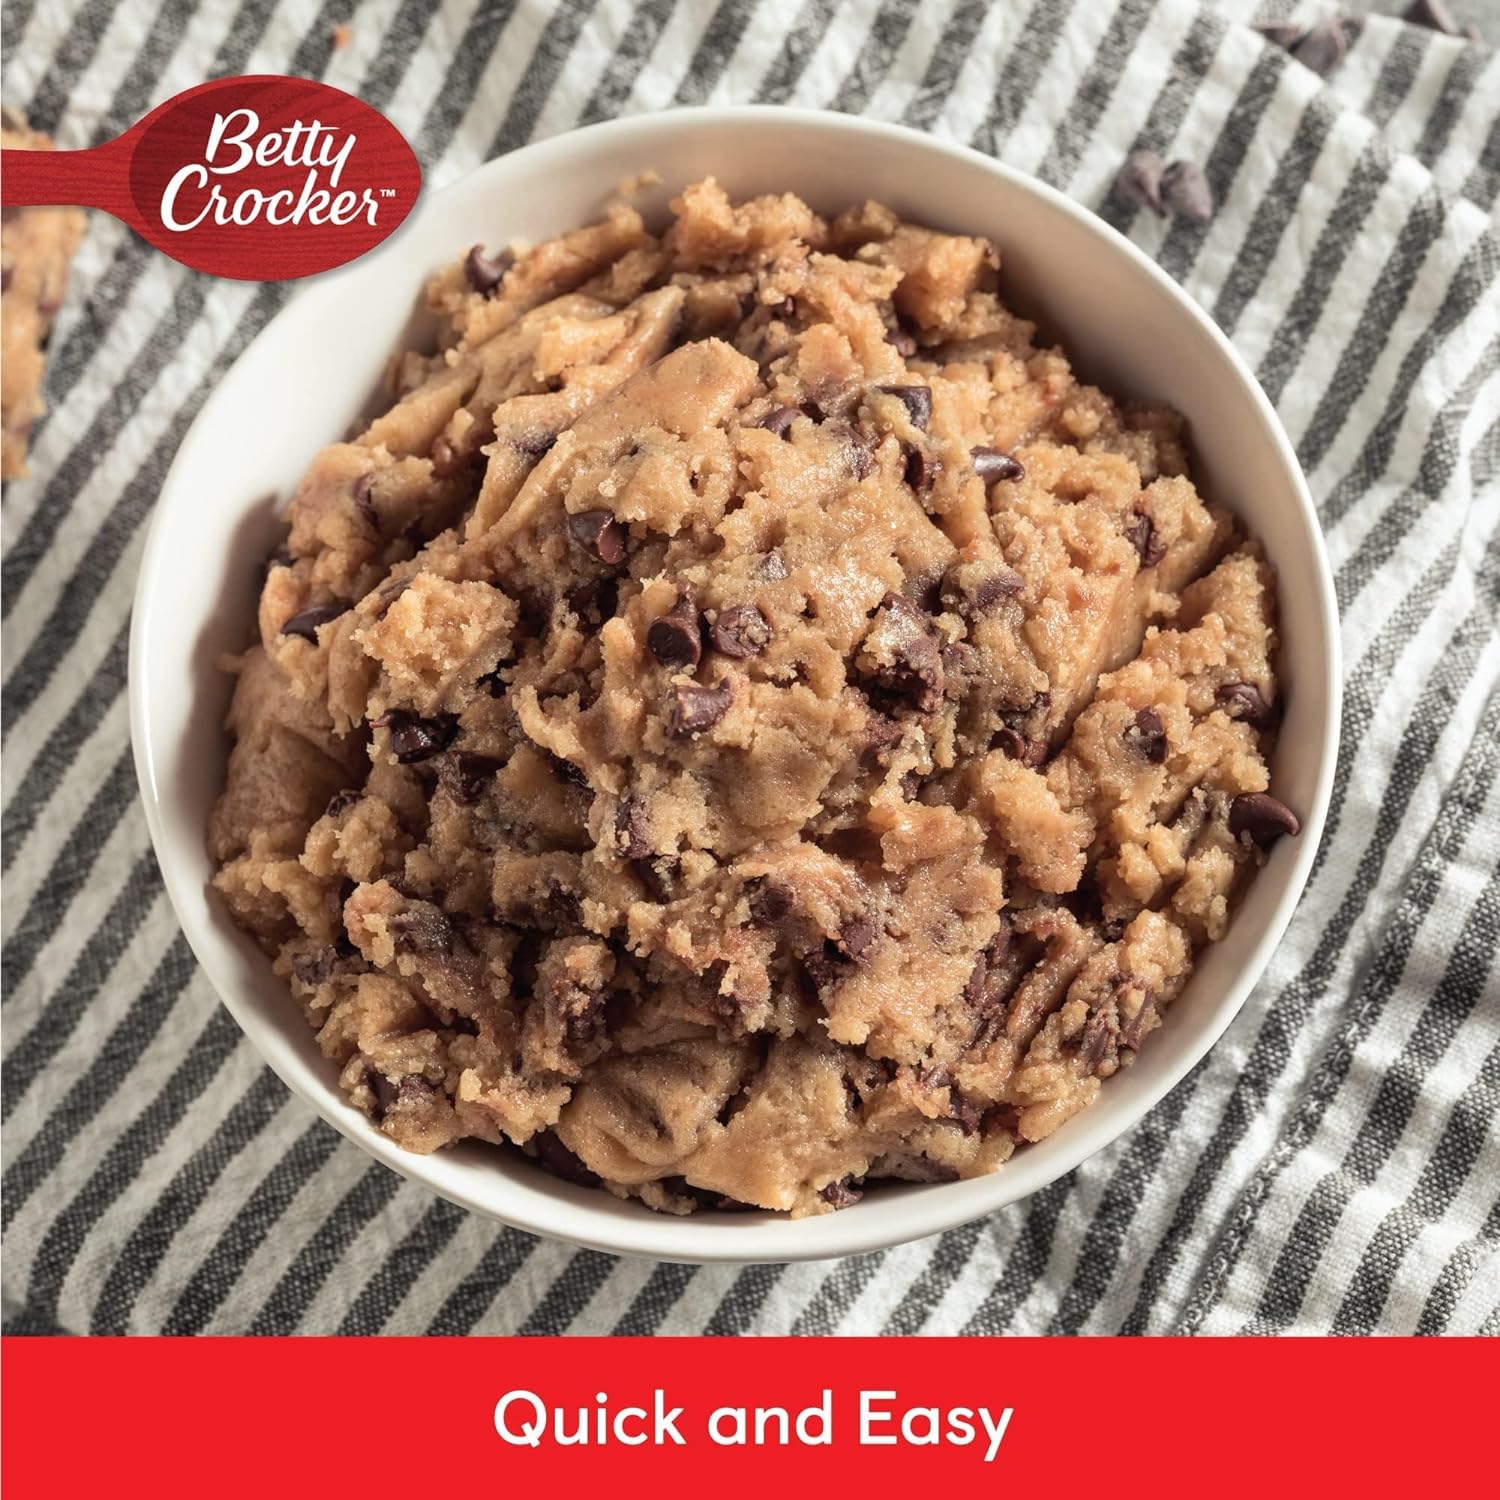 Betty Crocker Chocolate Chip Cookie Mix, 496g - Pack of 1